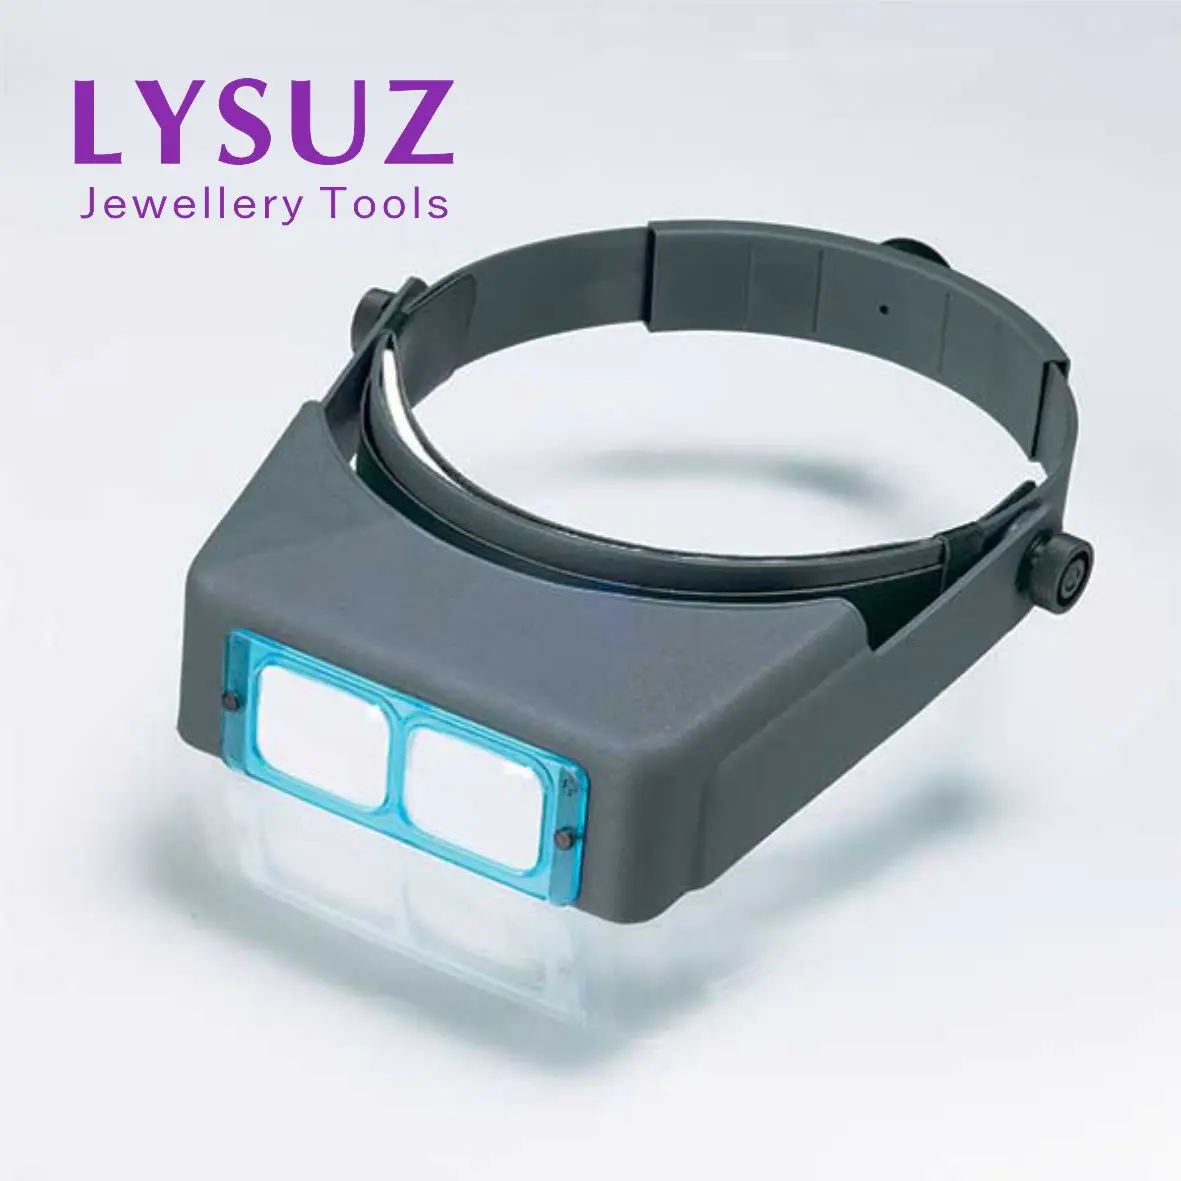 Powerful Magnifying Glasses with 4 Lens Optivisor Headband Magnifier Watch  Repair Magnifying Lupa Welding Head Viso Hansfree